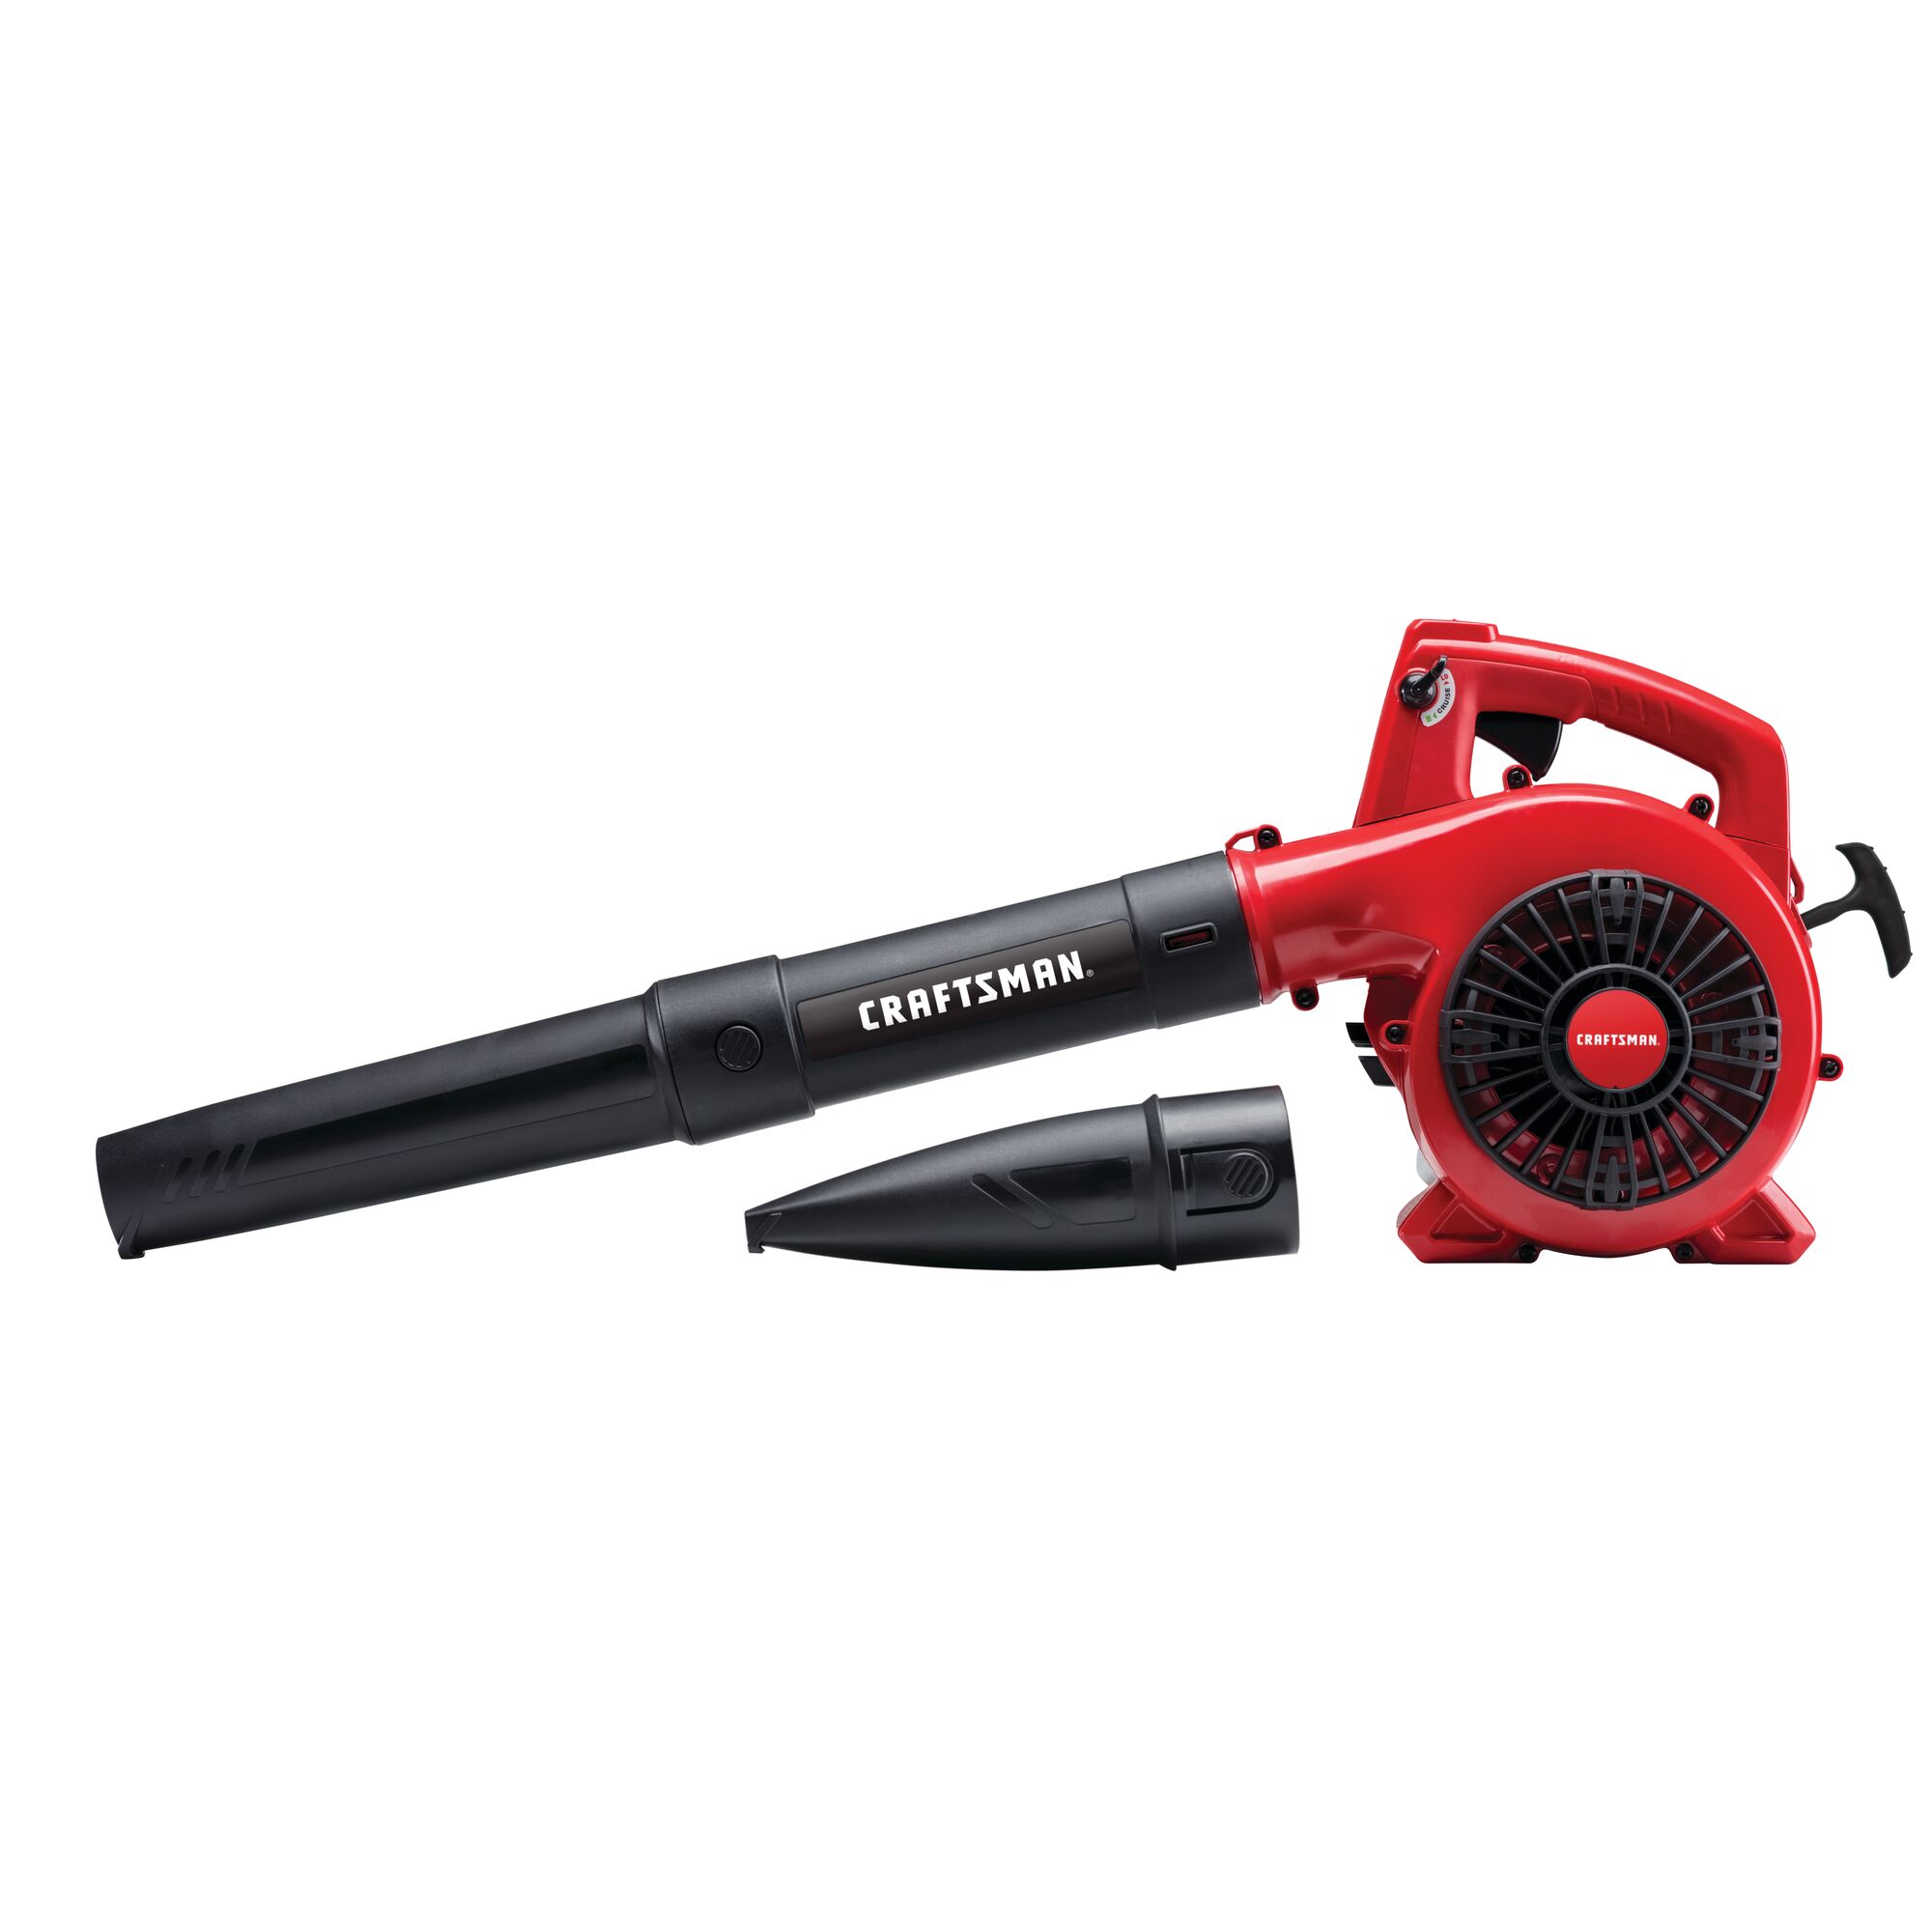 25 C C 2 cycle leaf blower with complete kit.